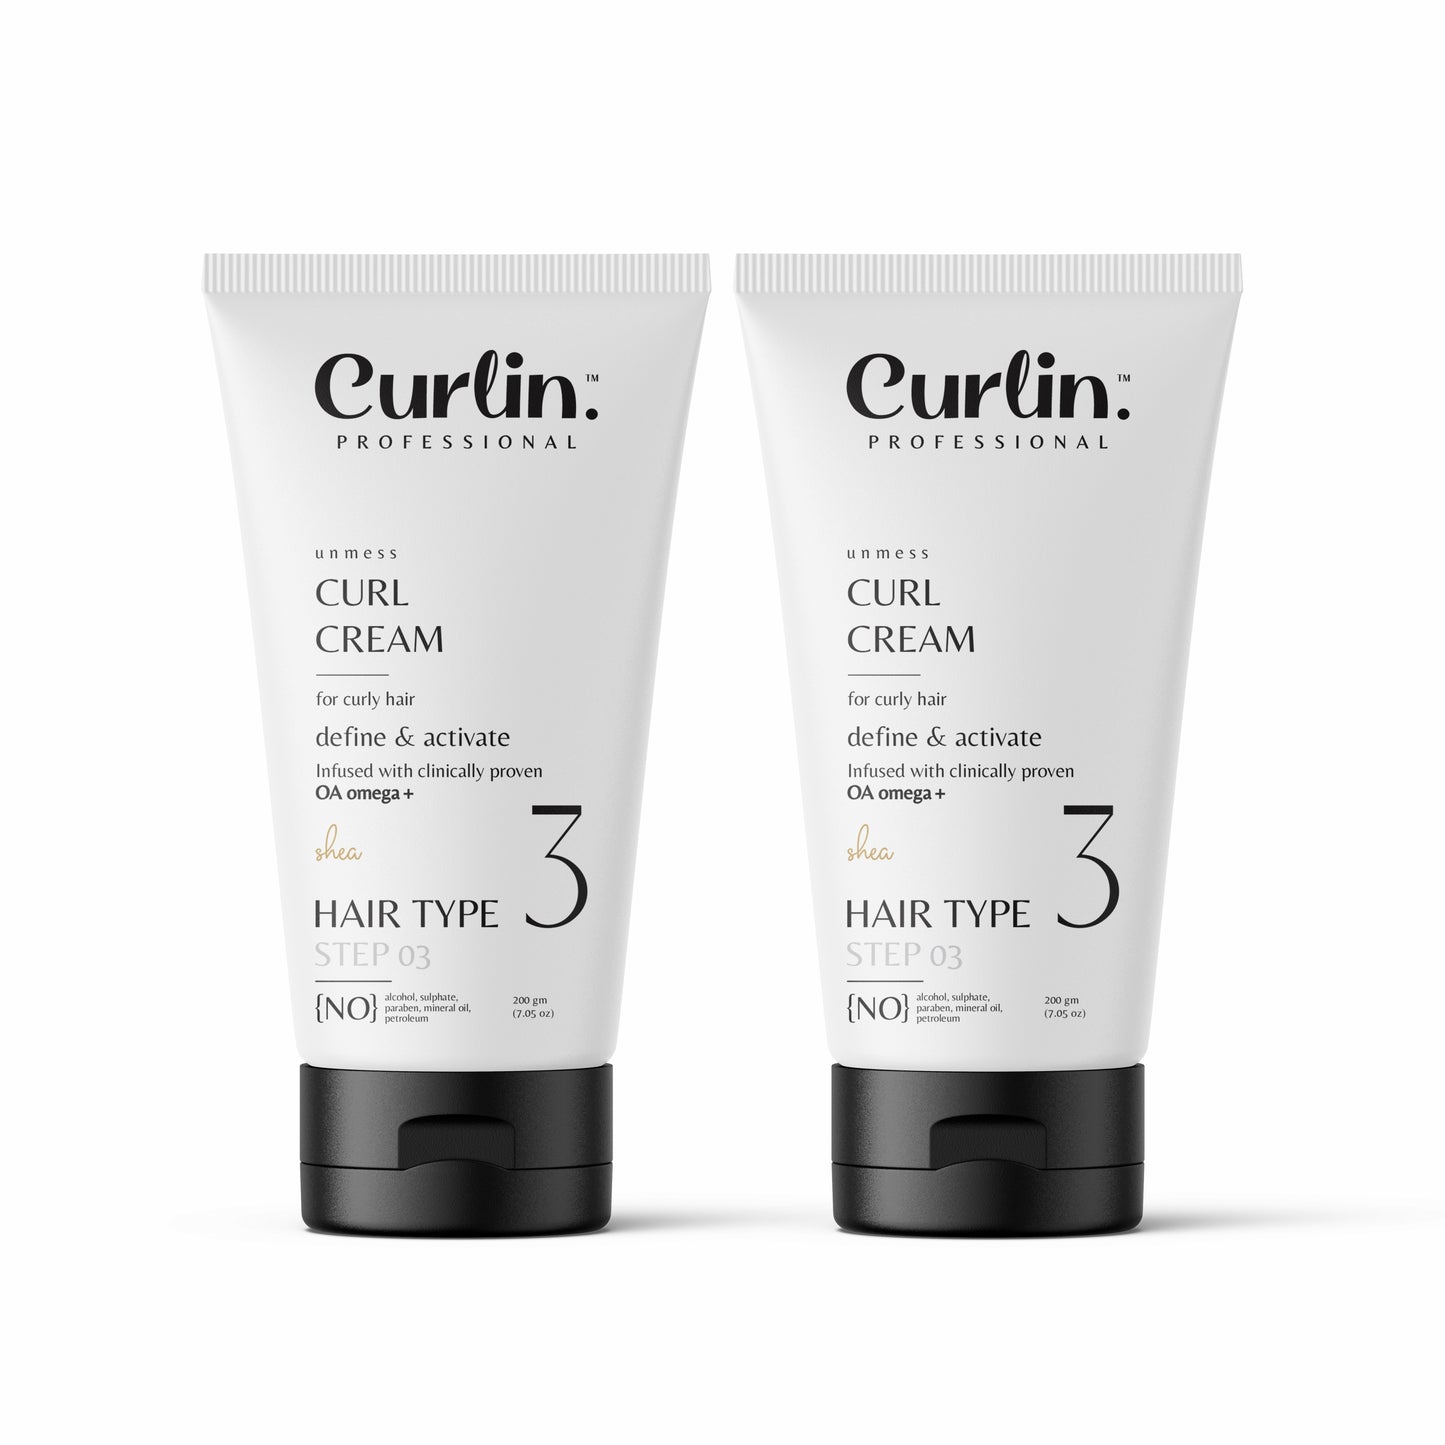 Anti Frizz & Moisture Balance Curl Cream Duo with natural OA Omega+ - Set of 2 - 200gm each